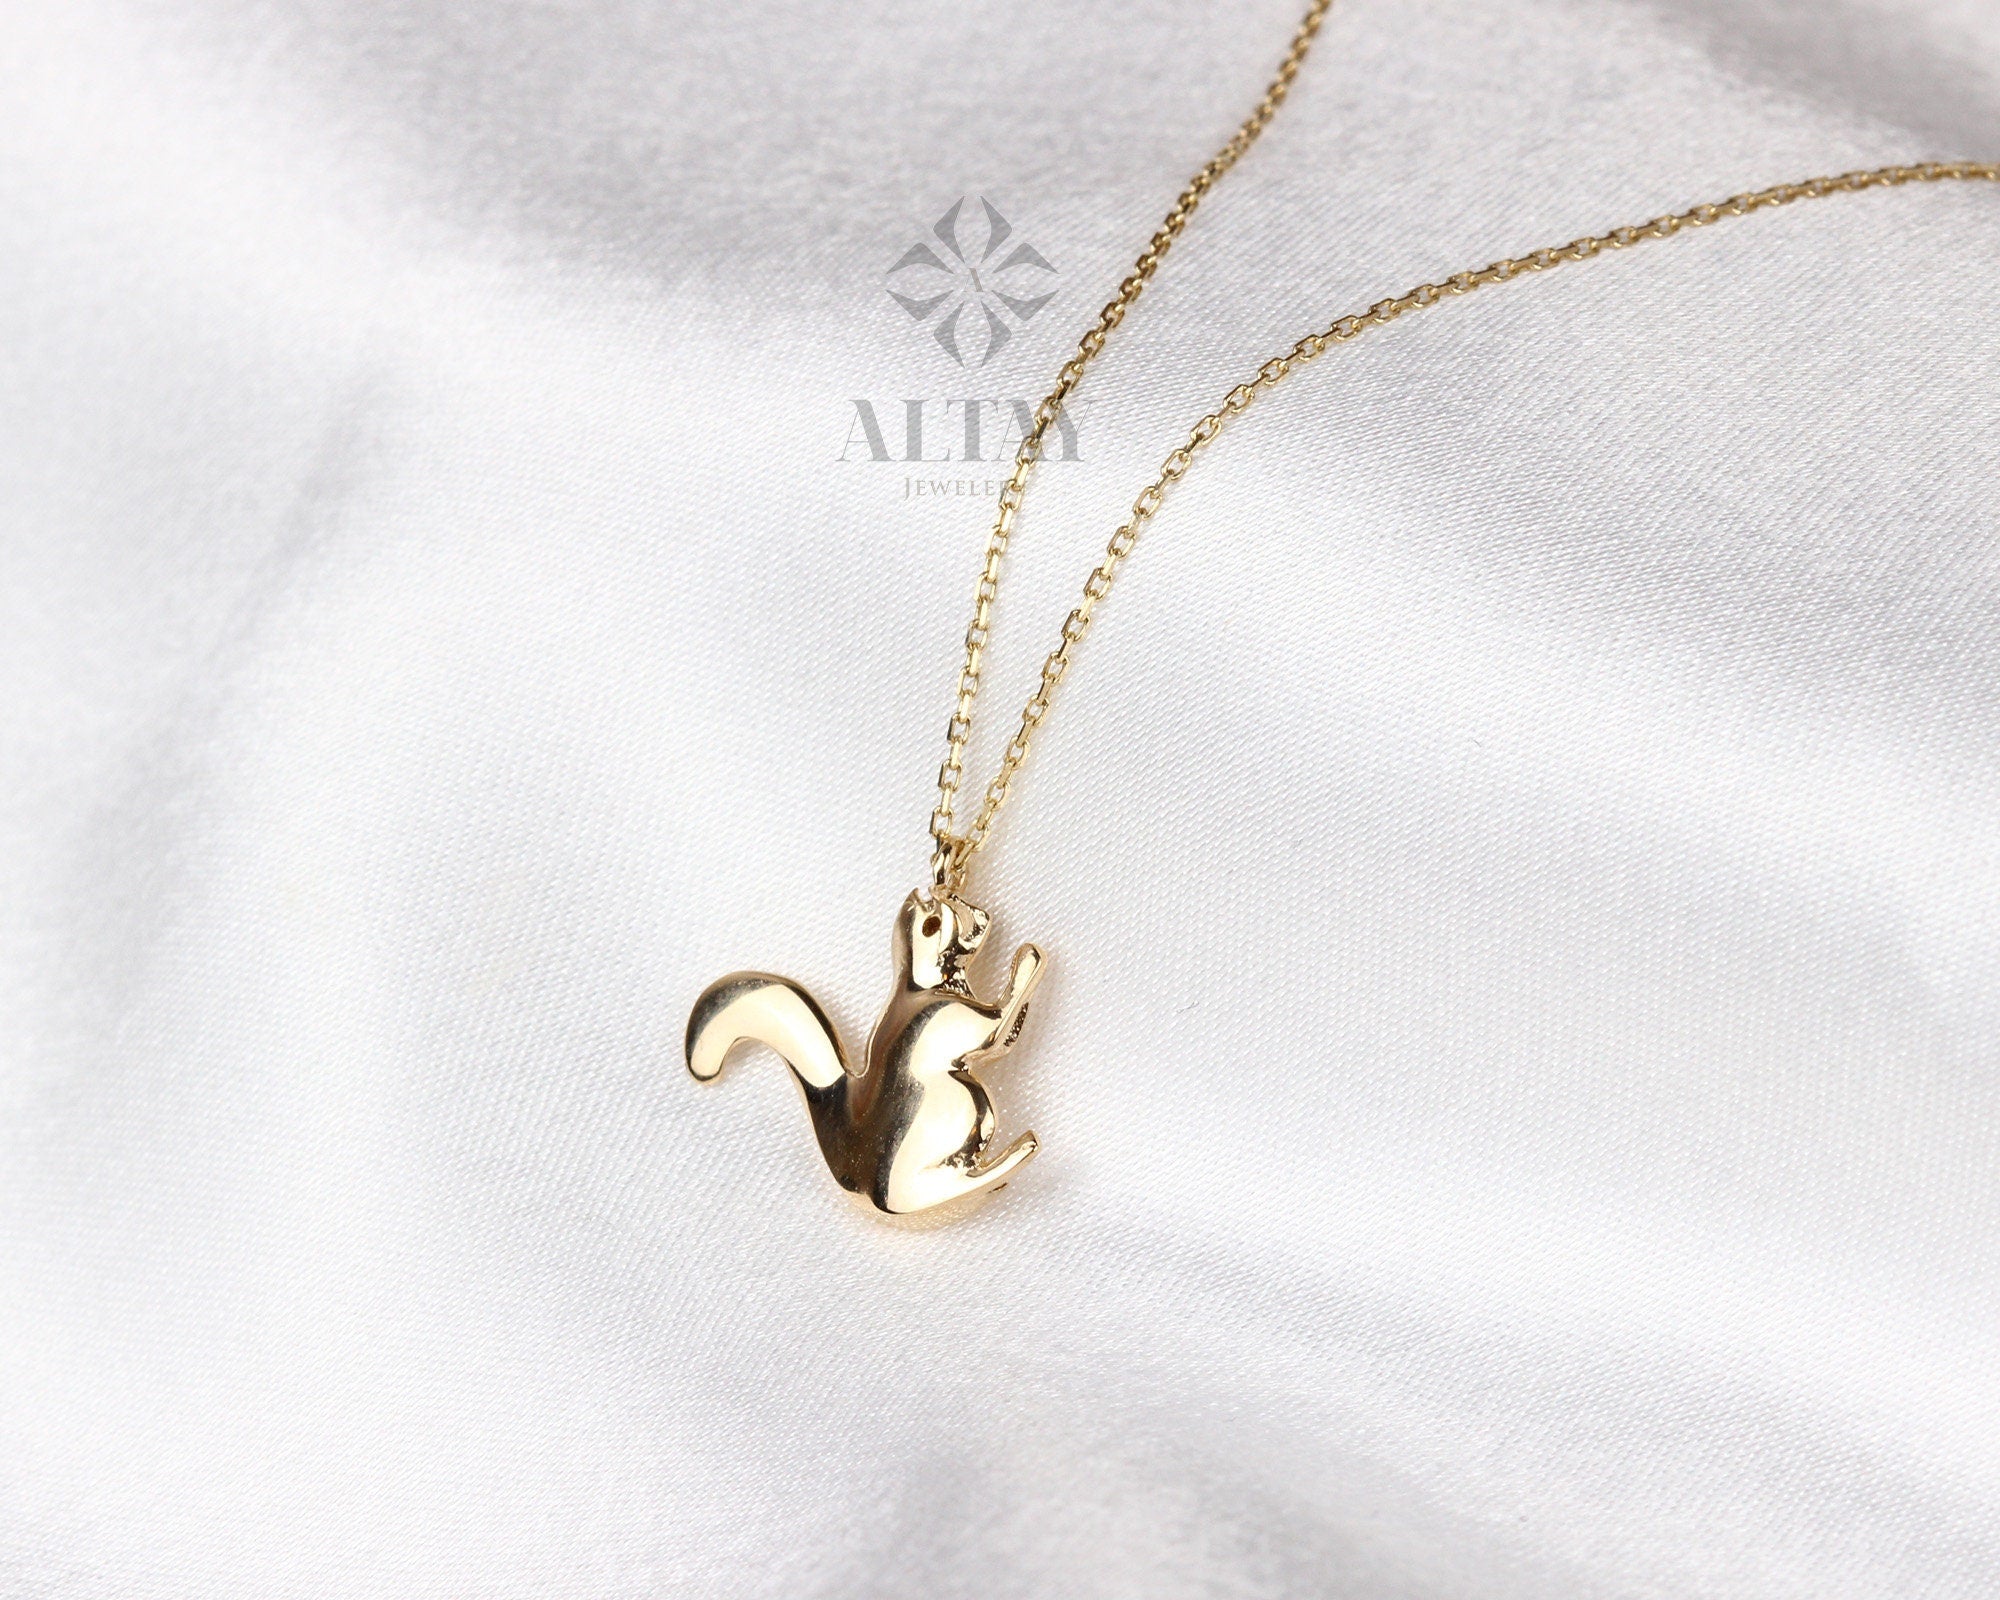 14K Gold Squirrel Necklace, Squirrel Charm Pendant, Good Luck Layering Chain Choker, Animal Pendant, Dainty Gold Charm Jewelry, Gift for Her